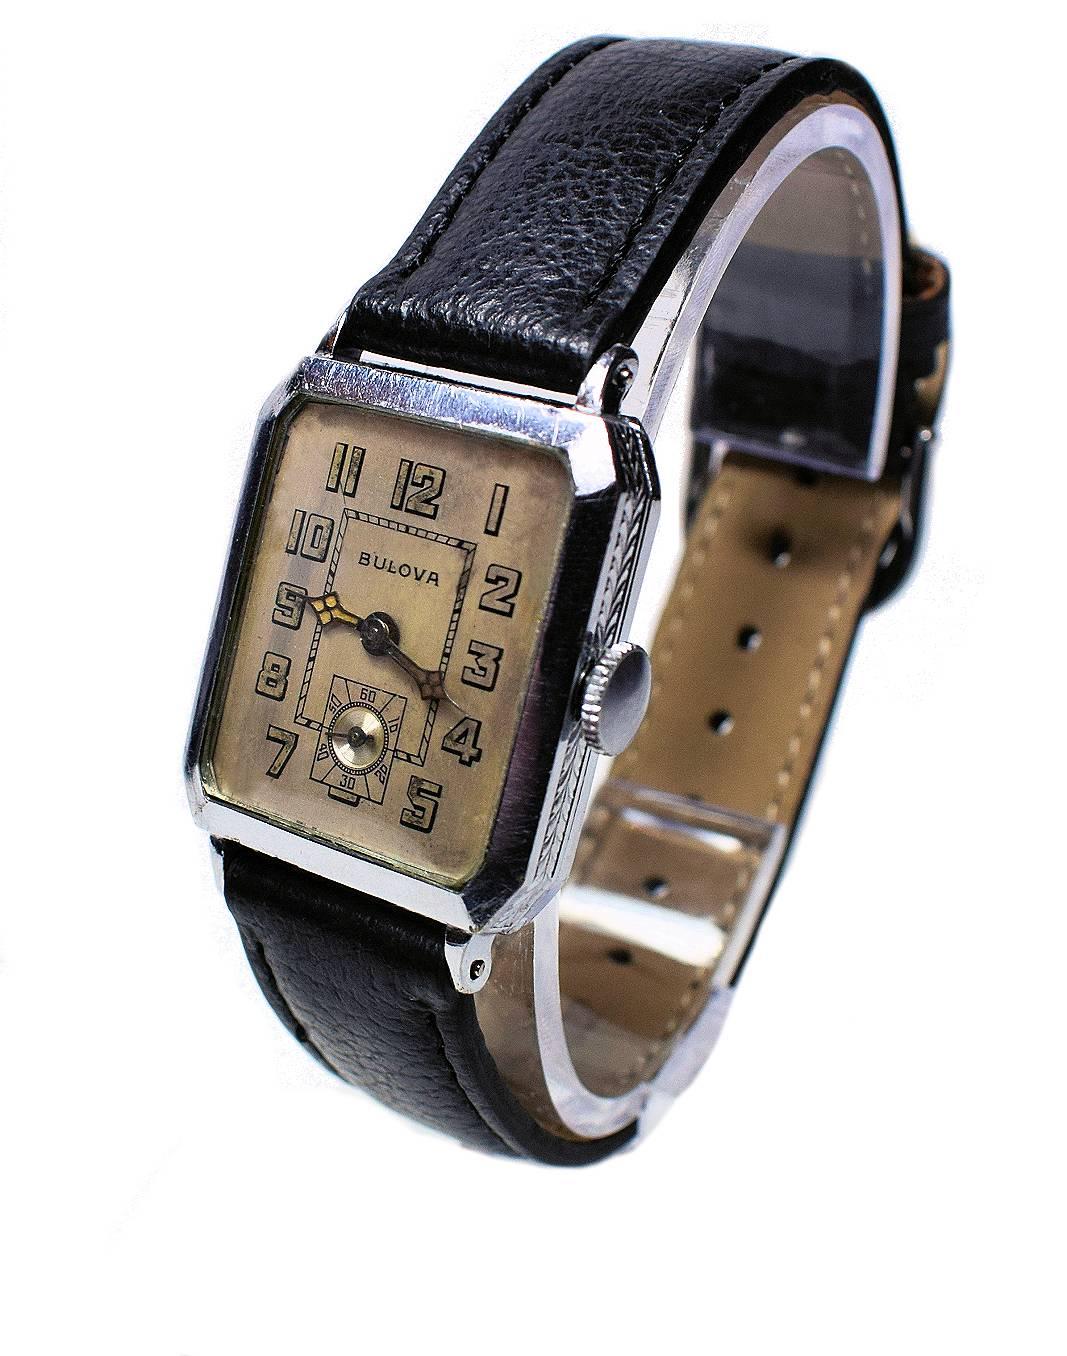 For your consideration is this stylish men’s Bulova ‘Breton’ model wristwatch dating from 1928-1930. This watch has been fully and professionally serviced.
The excellent Bulova signed case is finished in 14-karat gold fill as confirmed on the